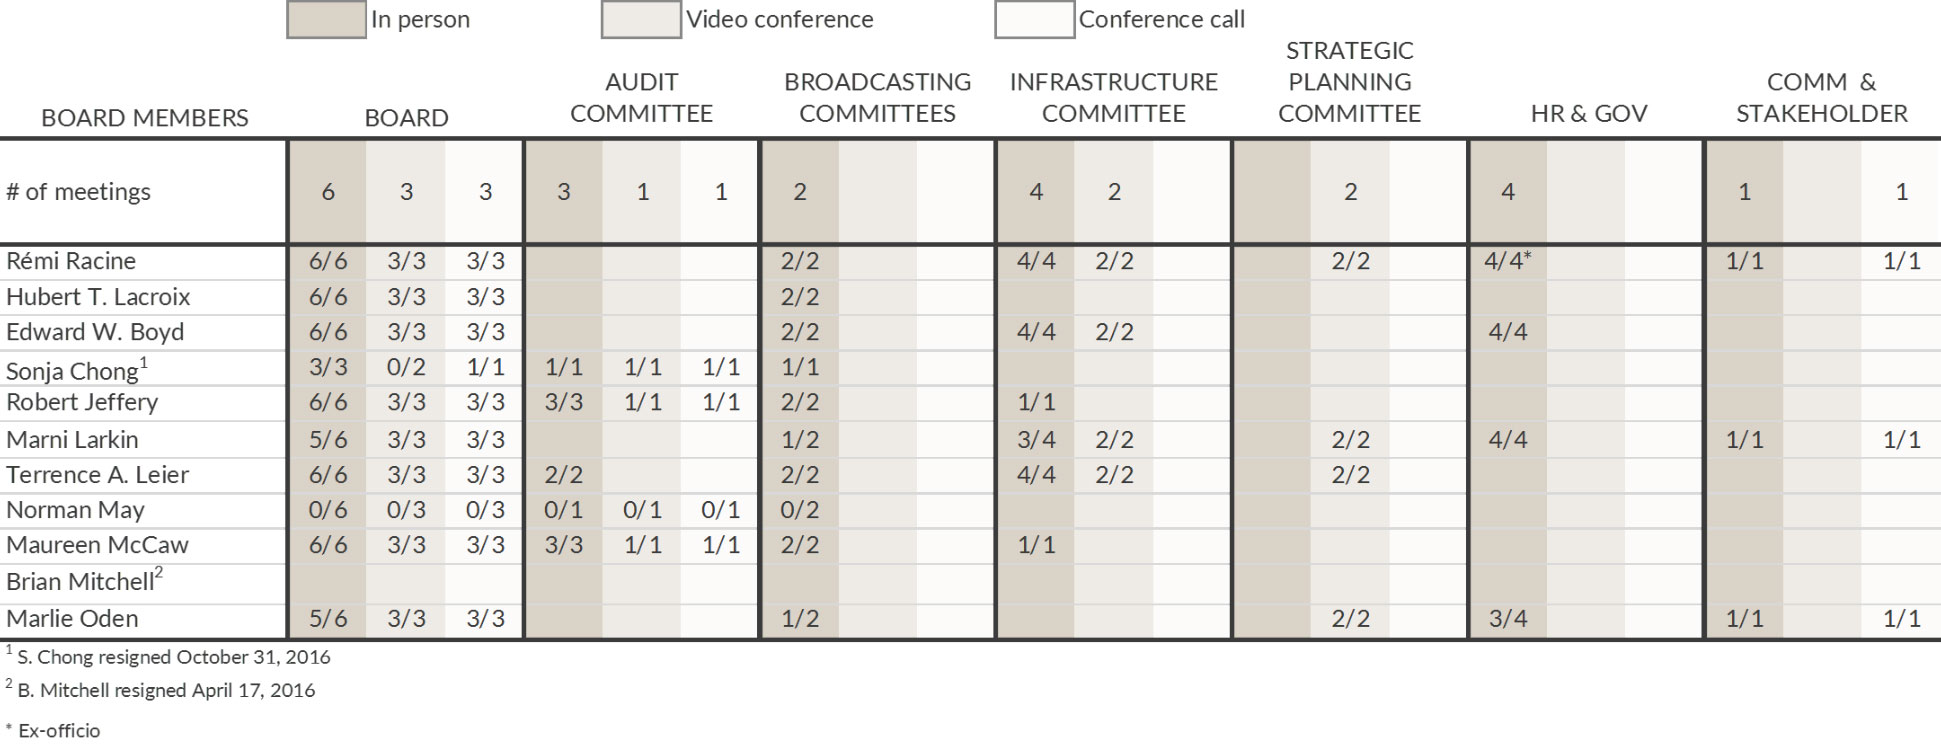 Board Committees and Attendance